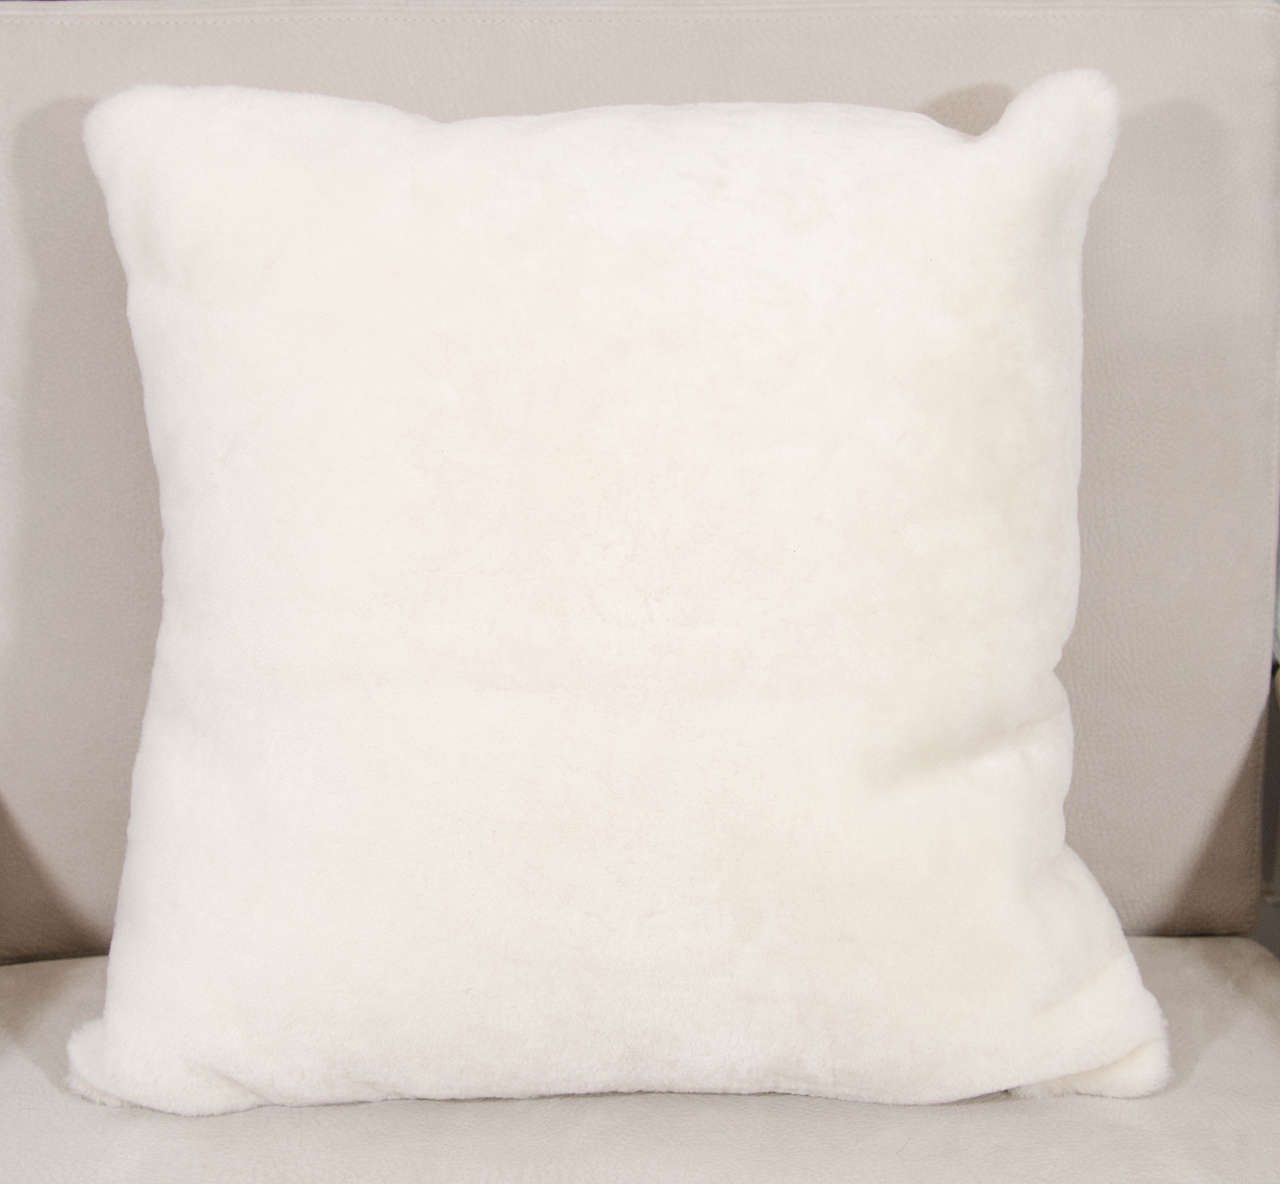 Shearling pillow with suede backing.